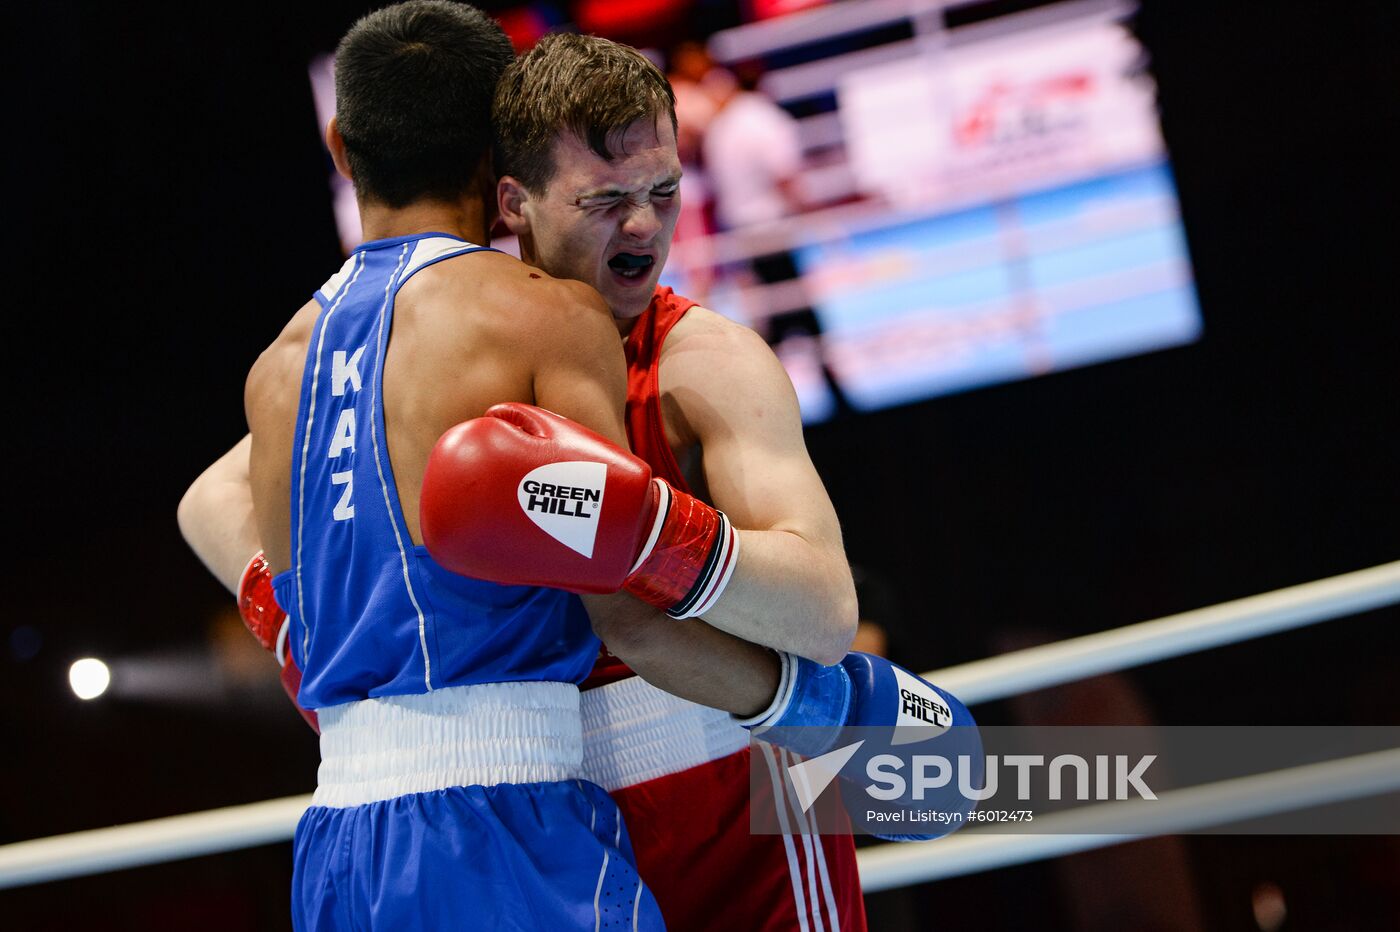 Russia Boxing Worlds